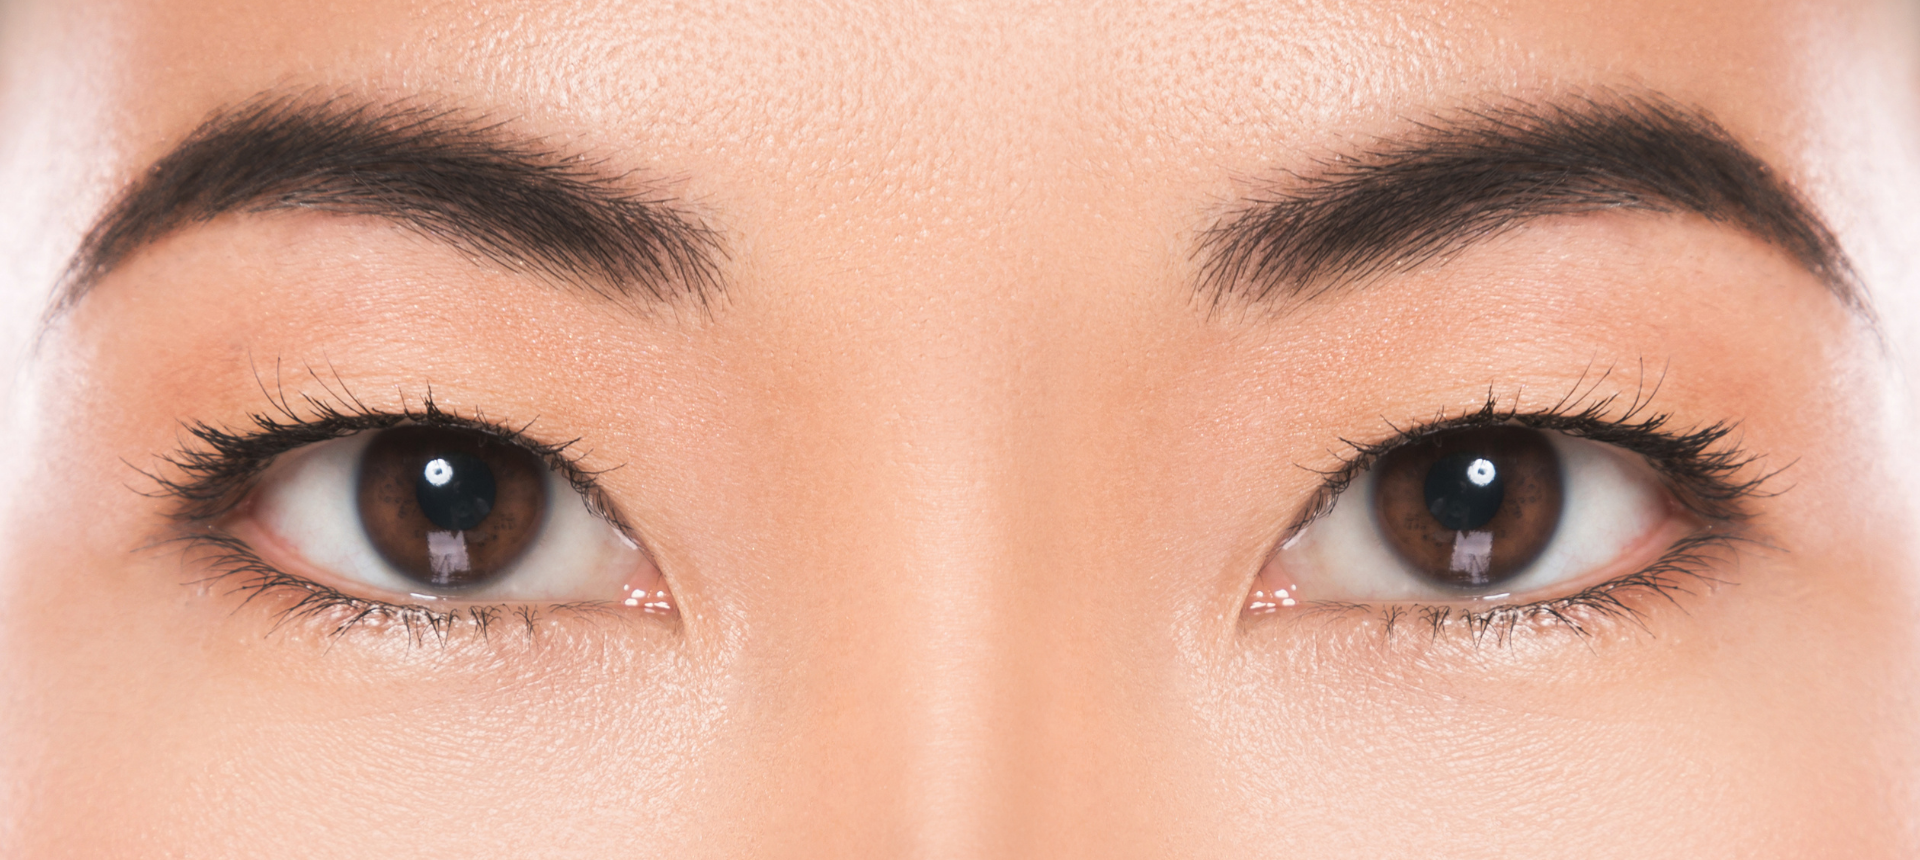 Non-invasive laser lift for brows, eyelids, and forehead